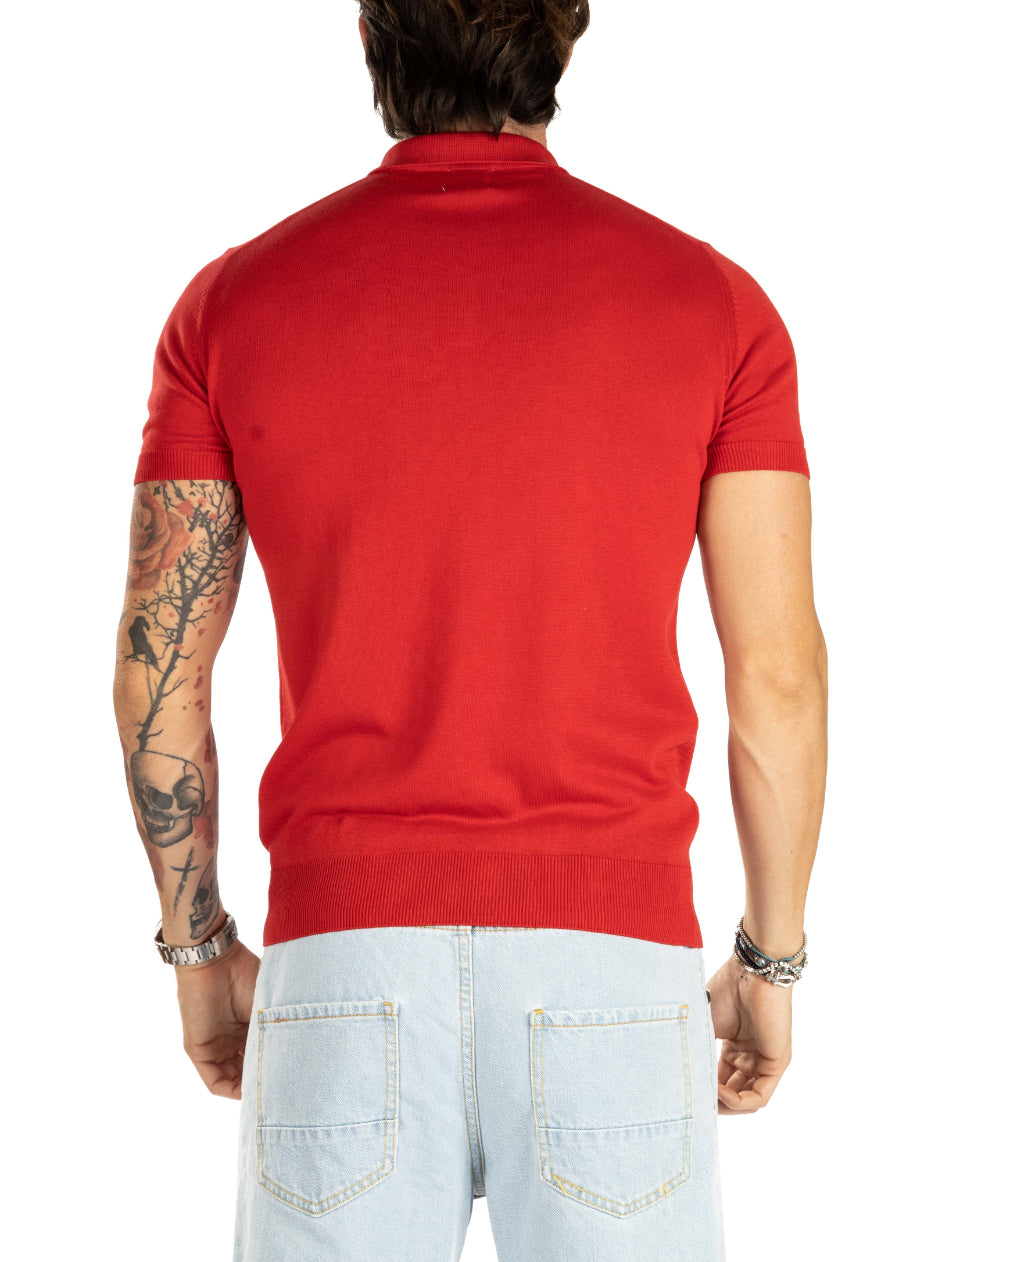 ROGER - RED KNITTED POLO SHIRT